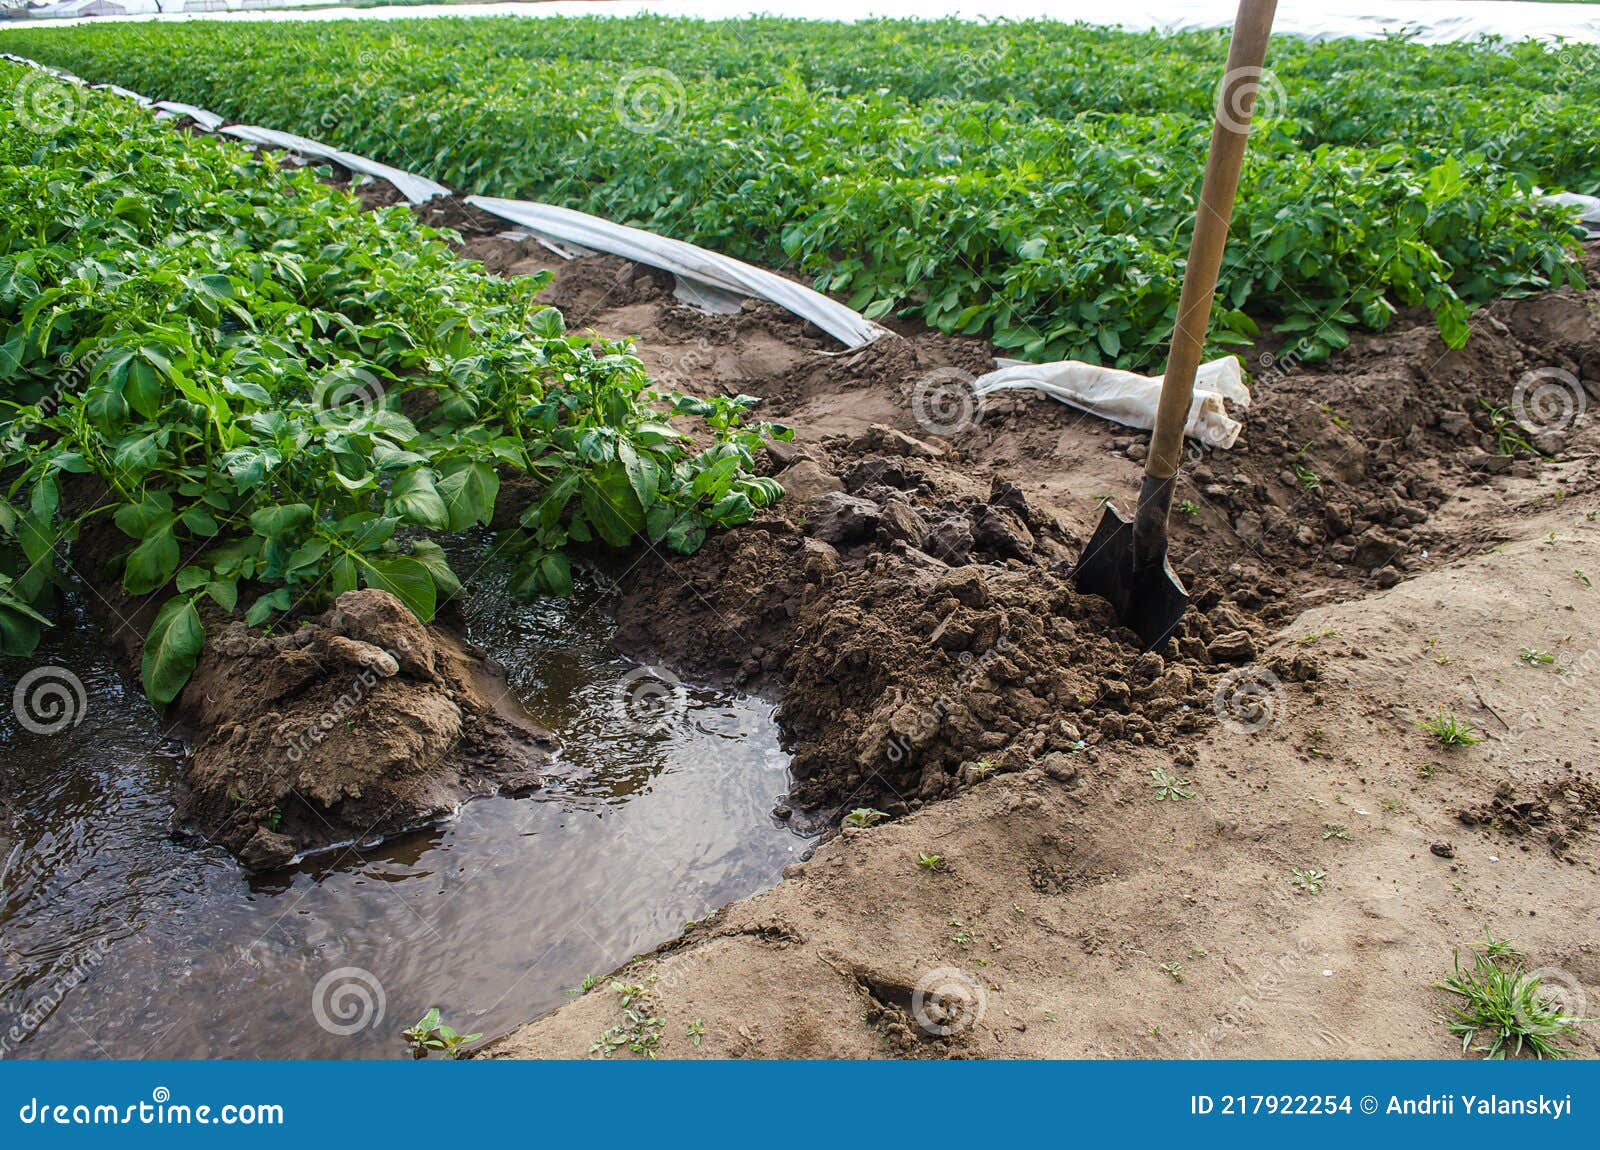 a stream of water through a canal dug out by a shovel irrigates a plantation of potato bushes. agriculture industry. growing crops